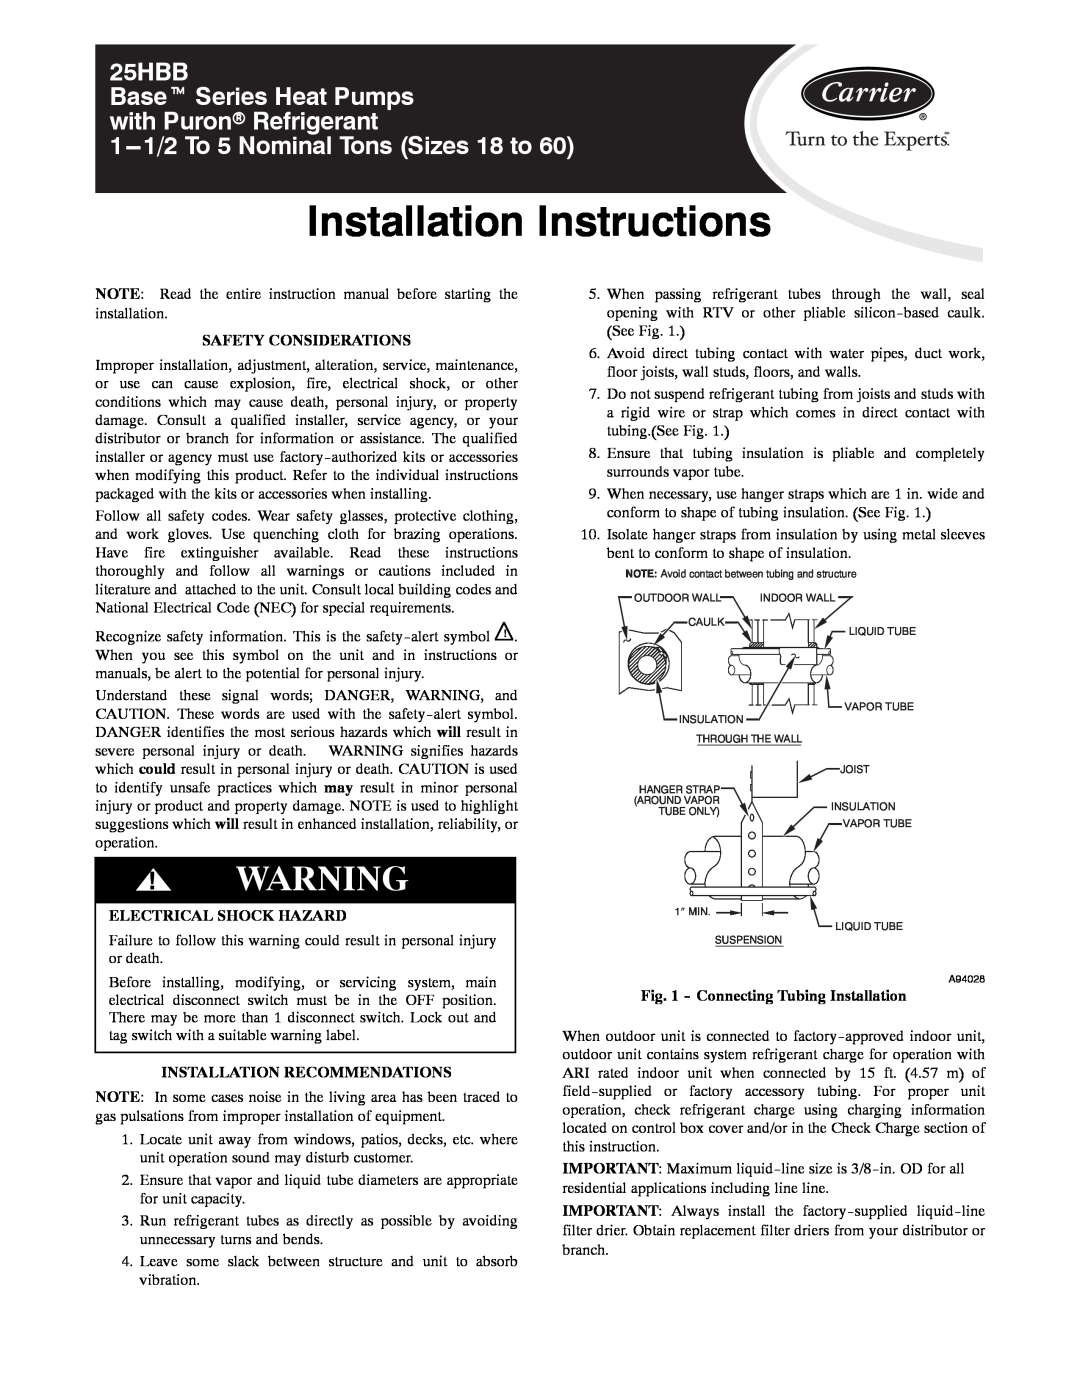 Carrier 25HBB installation instructions Safety Considerations, Electrical Shock Hazard, Installation Recommendations 